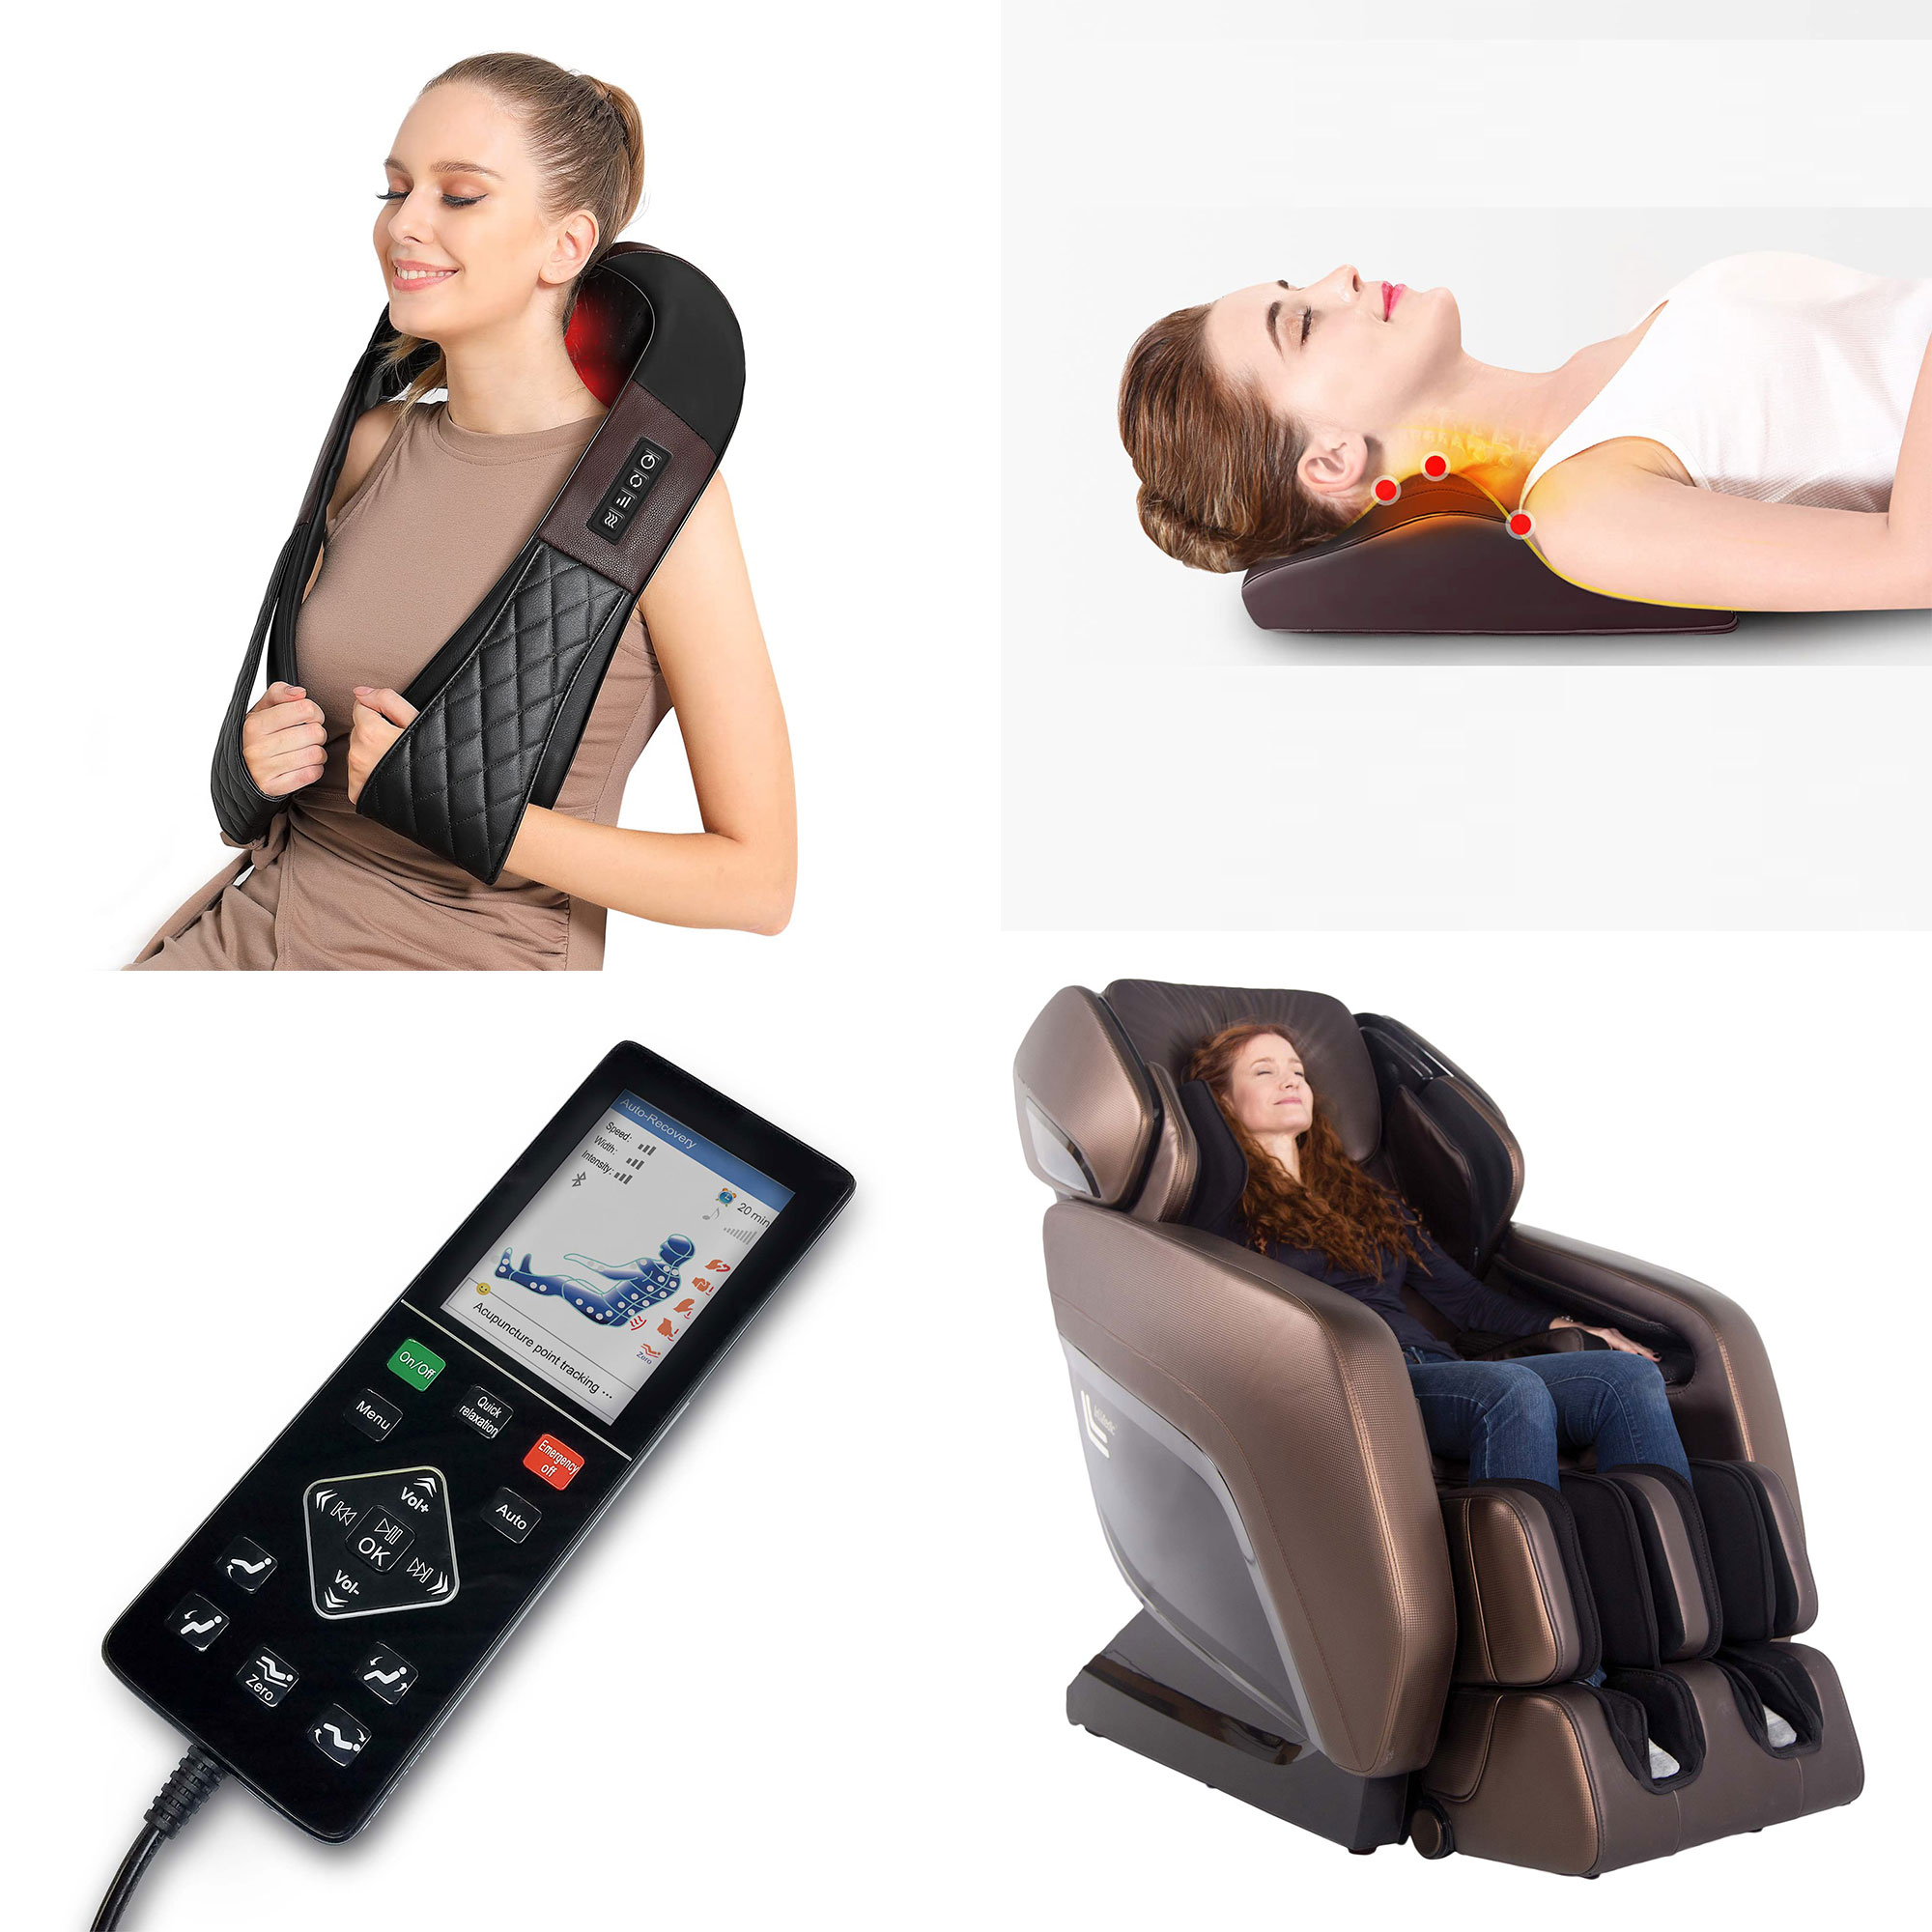 Full Body Massage For Neck, Back, Shoulders, Foot And More